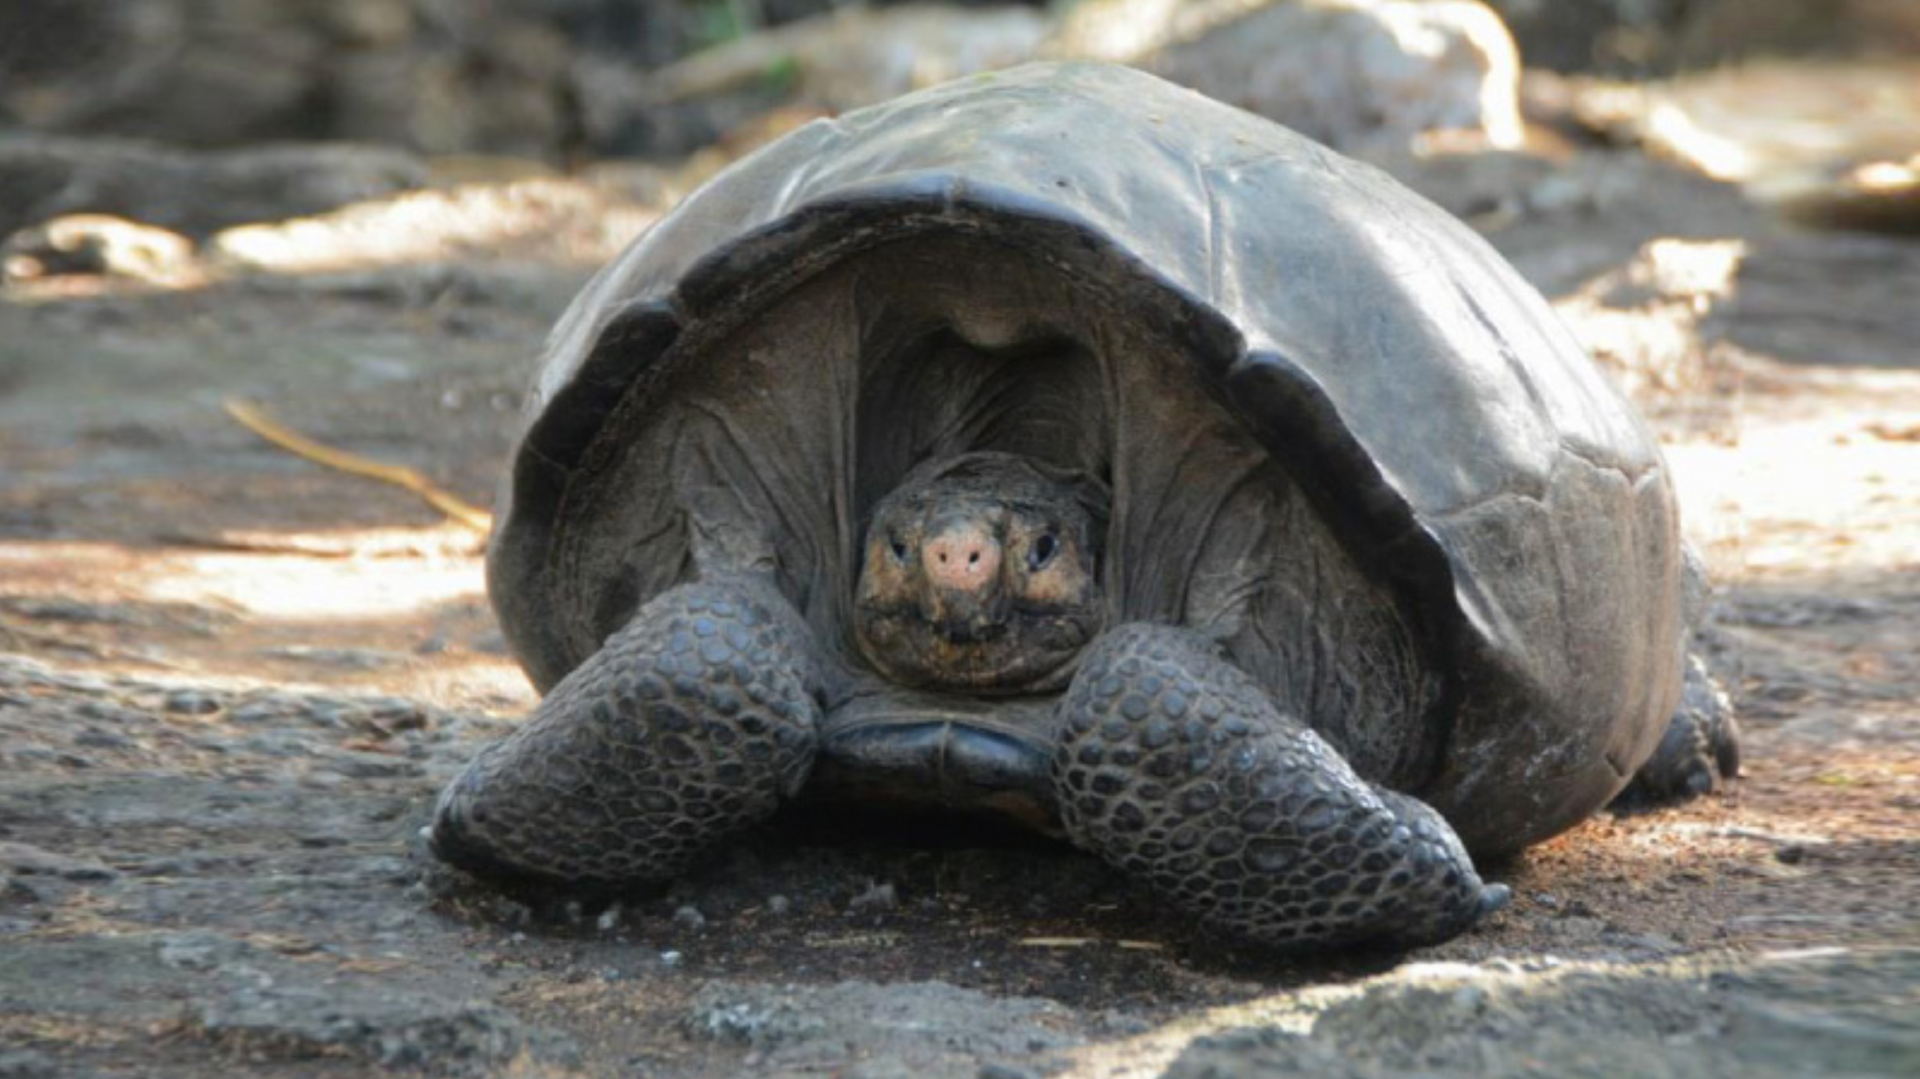 'Hope Still There' Galapagos Giant Tortoise of Species Considered Extinct 100 Years Ago Found Alive - Sputnik International, 1920, 26.05.2021